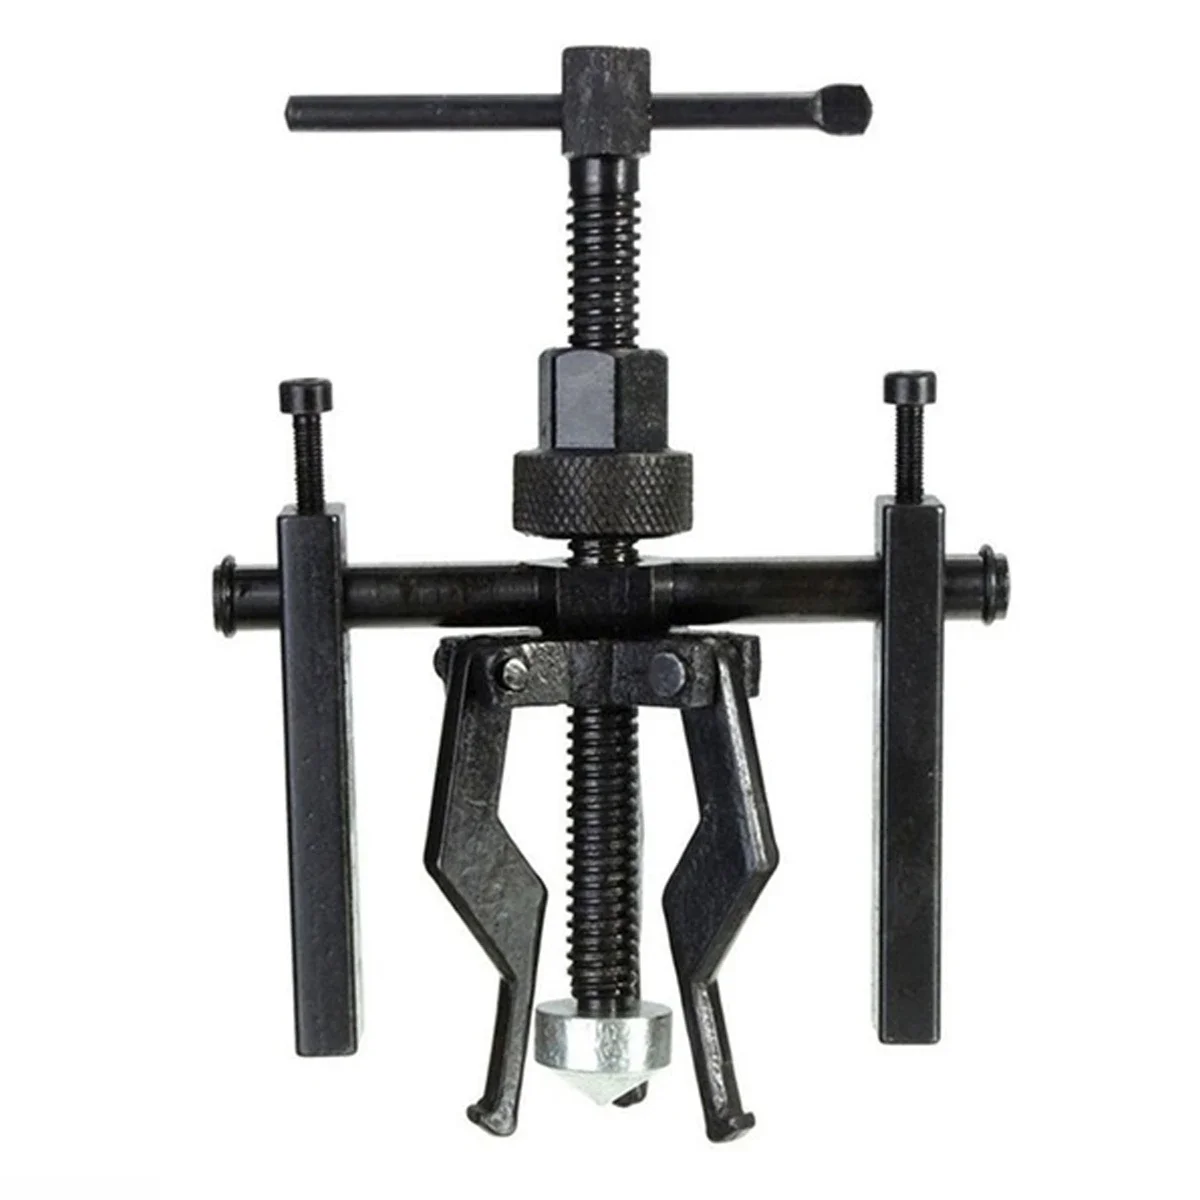 

Car 3-jaw Inner Bearing Puller Gear Extractor Carbon Steel Durable Heavy Duty Automotive Machine Tool Kit